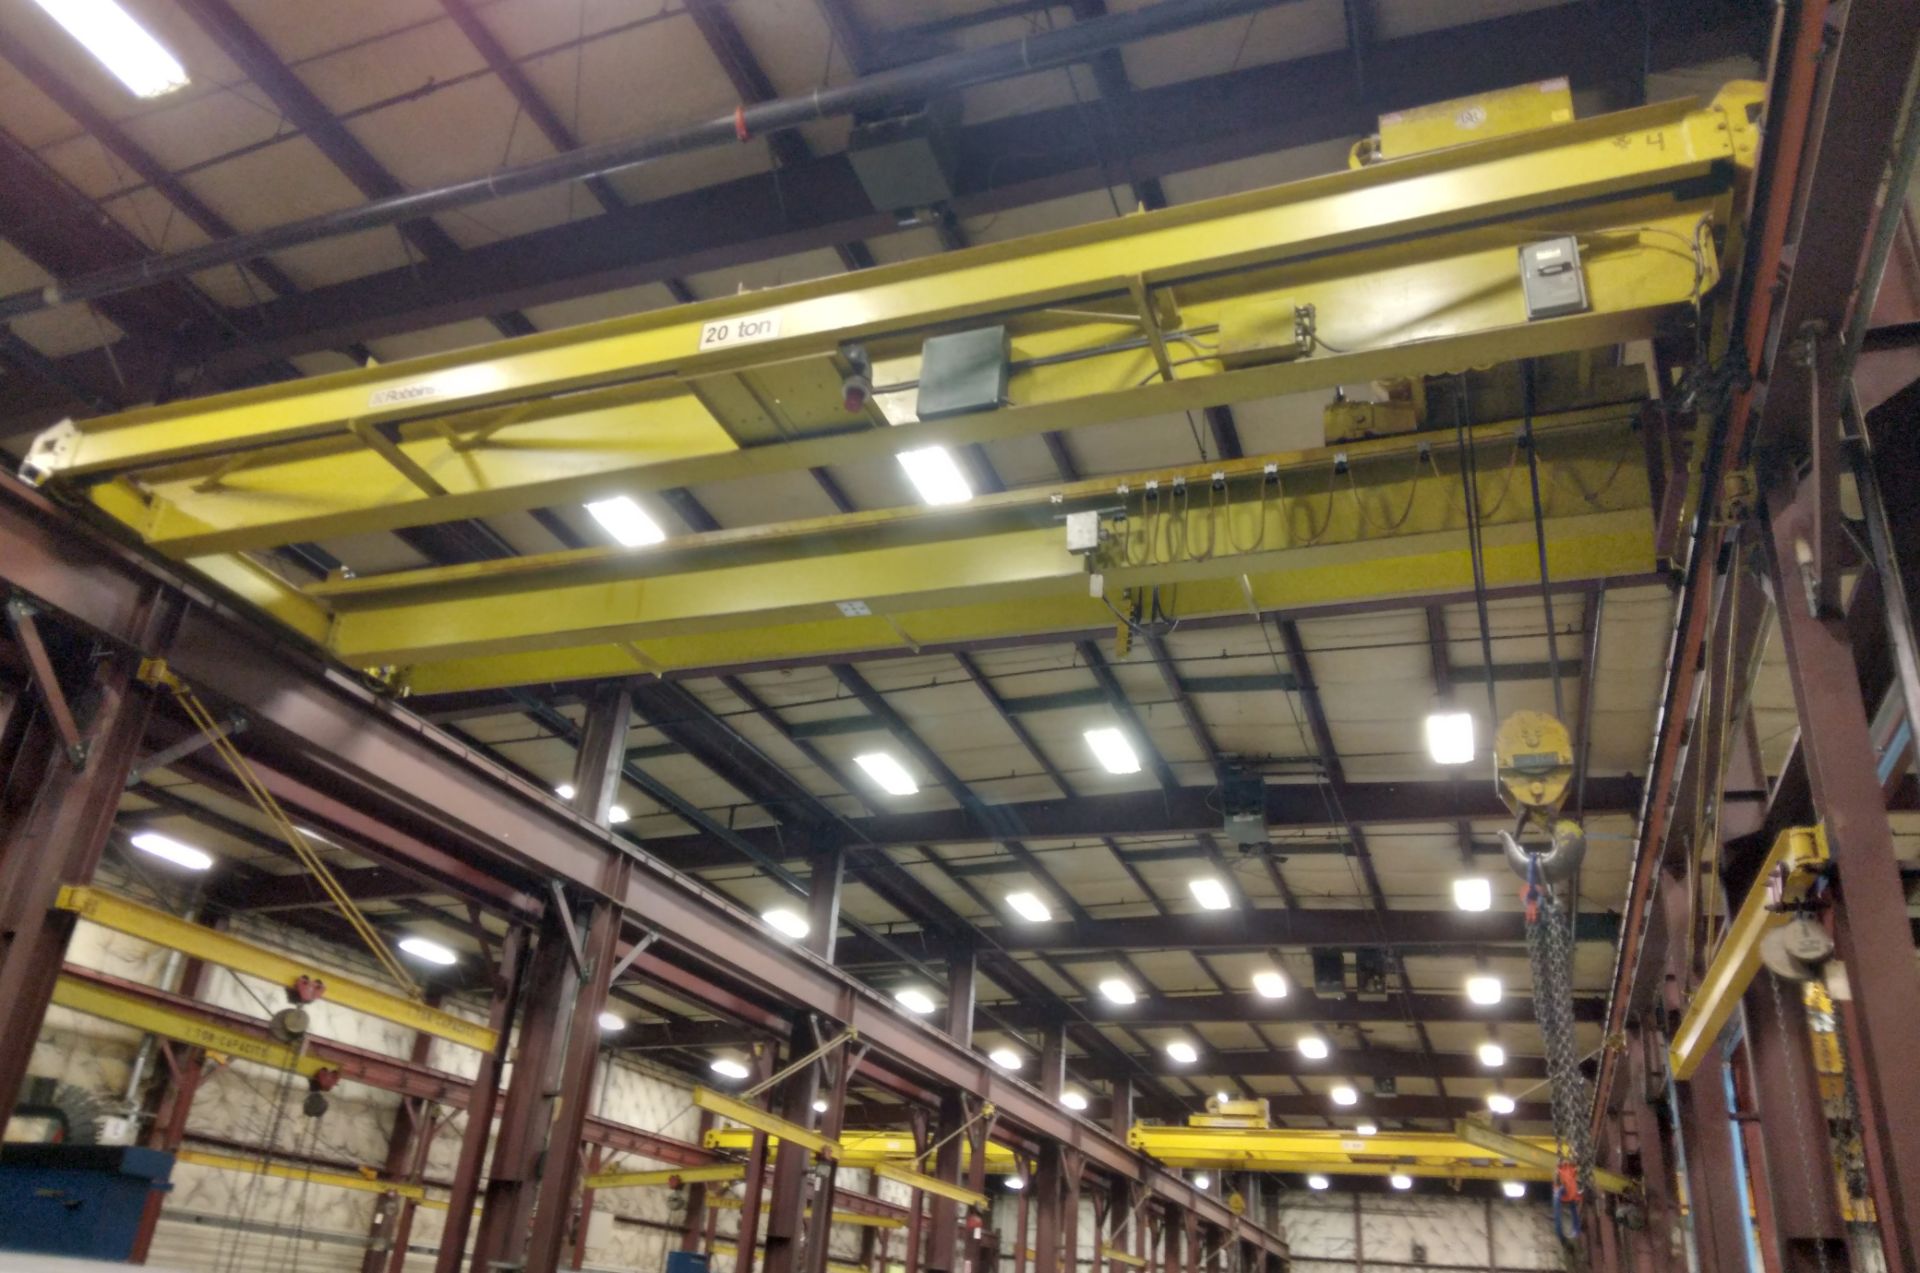 Robbins & Meyers 20 Ton Overhead Crane, Span and Hoist Only, No Rails, Remote Control and Pendant